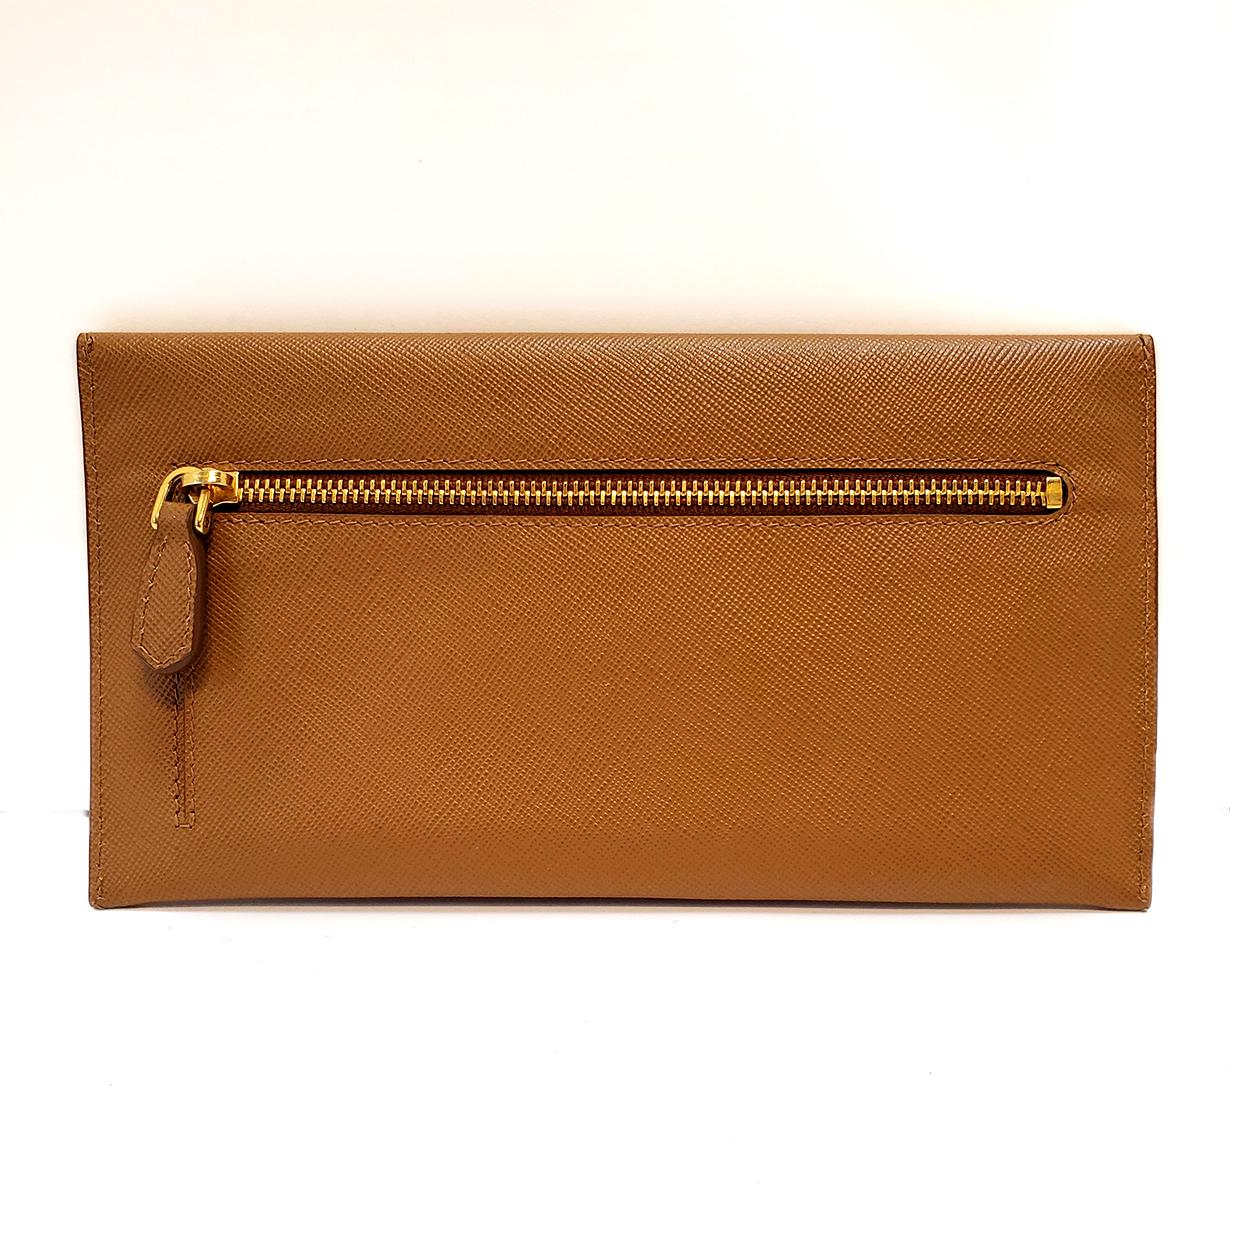 Brand - Prada
Collection - Saffiano
Estimated Retail - $580.00
Style - Clutch
Material - Leather
Color - Caramel
Closure - Snap
Hardware Material - Goldtone
Model/Date Code - 1M1175
Comes With - Designer Certificate of Authenticity
Size -